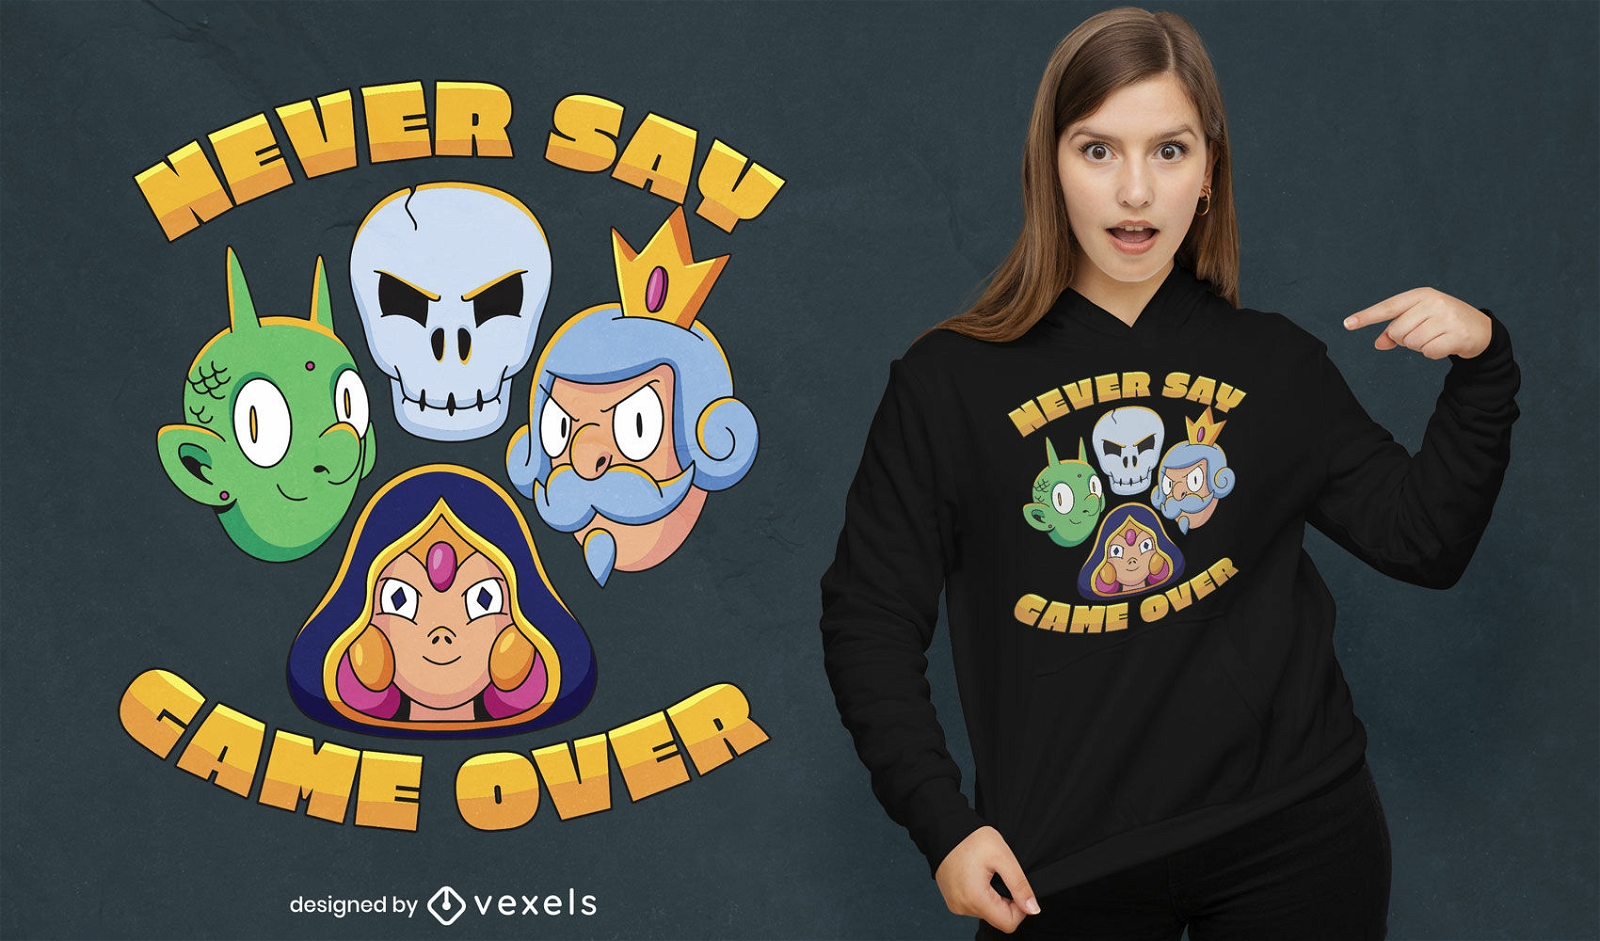 Videogame characters t-shirt design